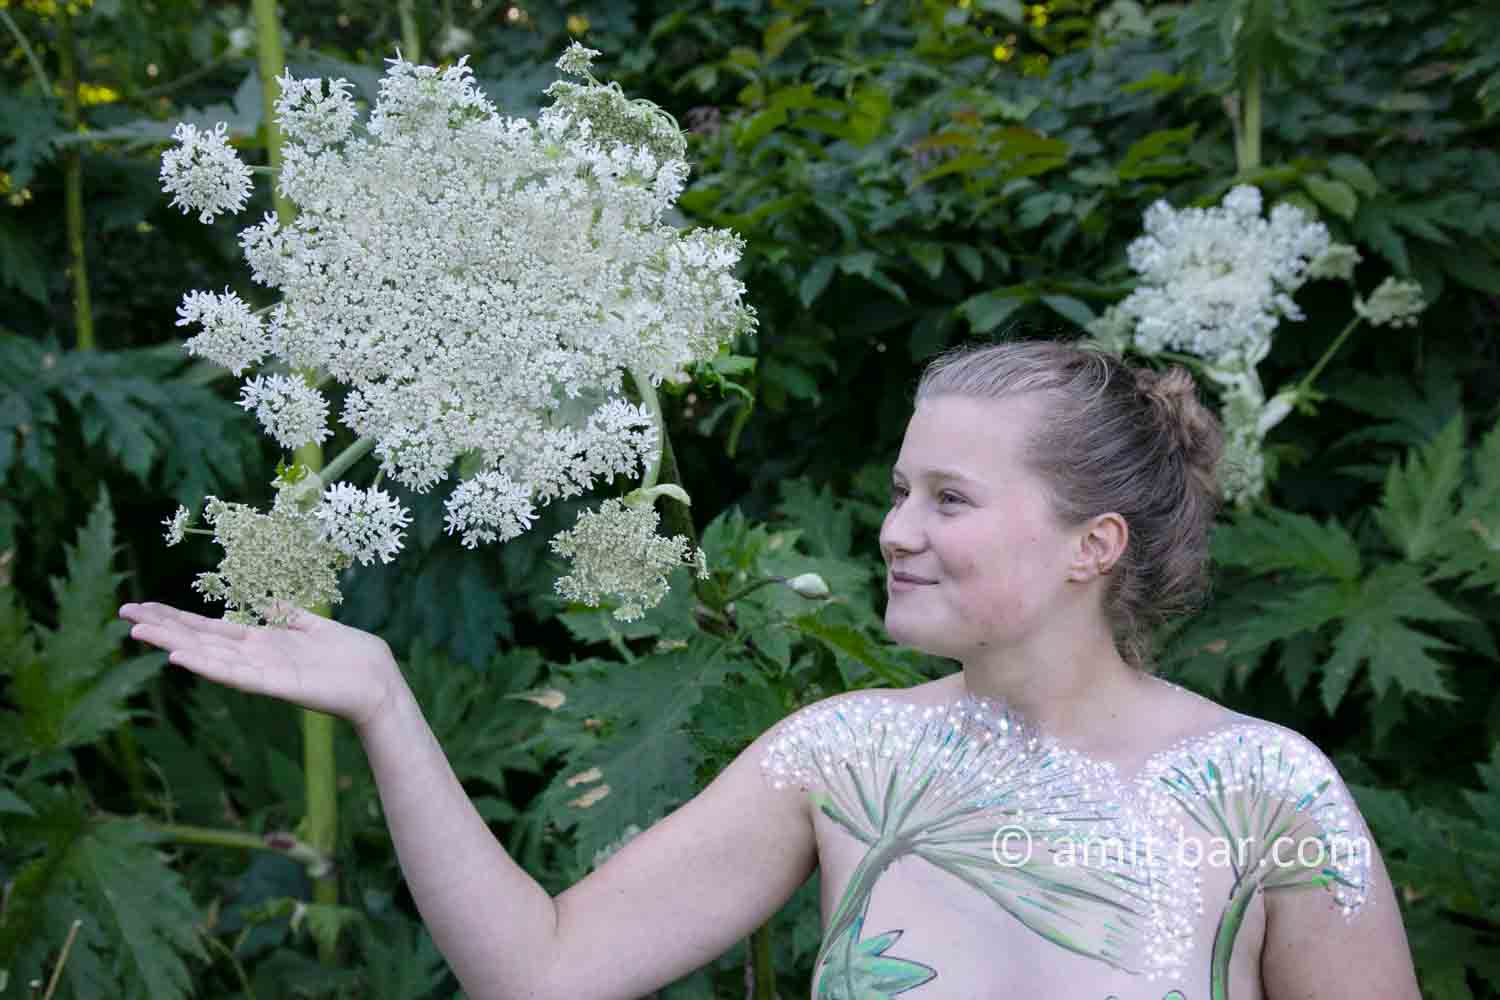 Hogweed plant portrait II: A Portrait of Shelly, who is walking along the beautiful Giant Hogweed plant